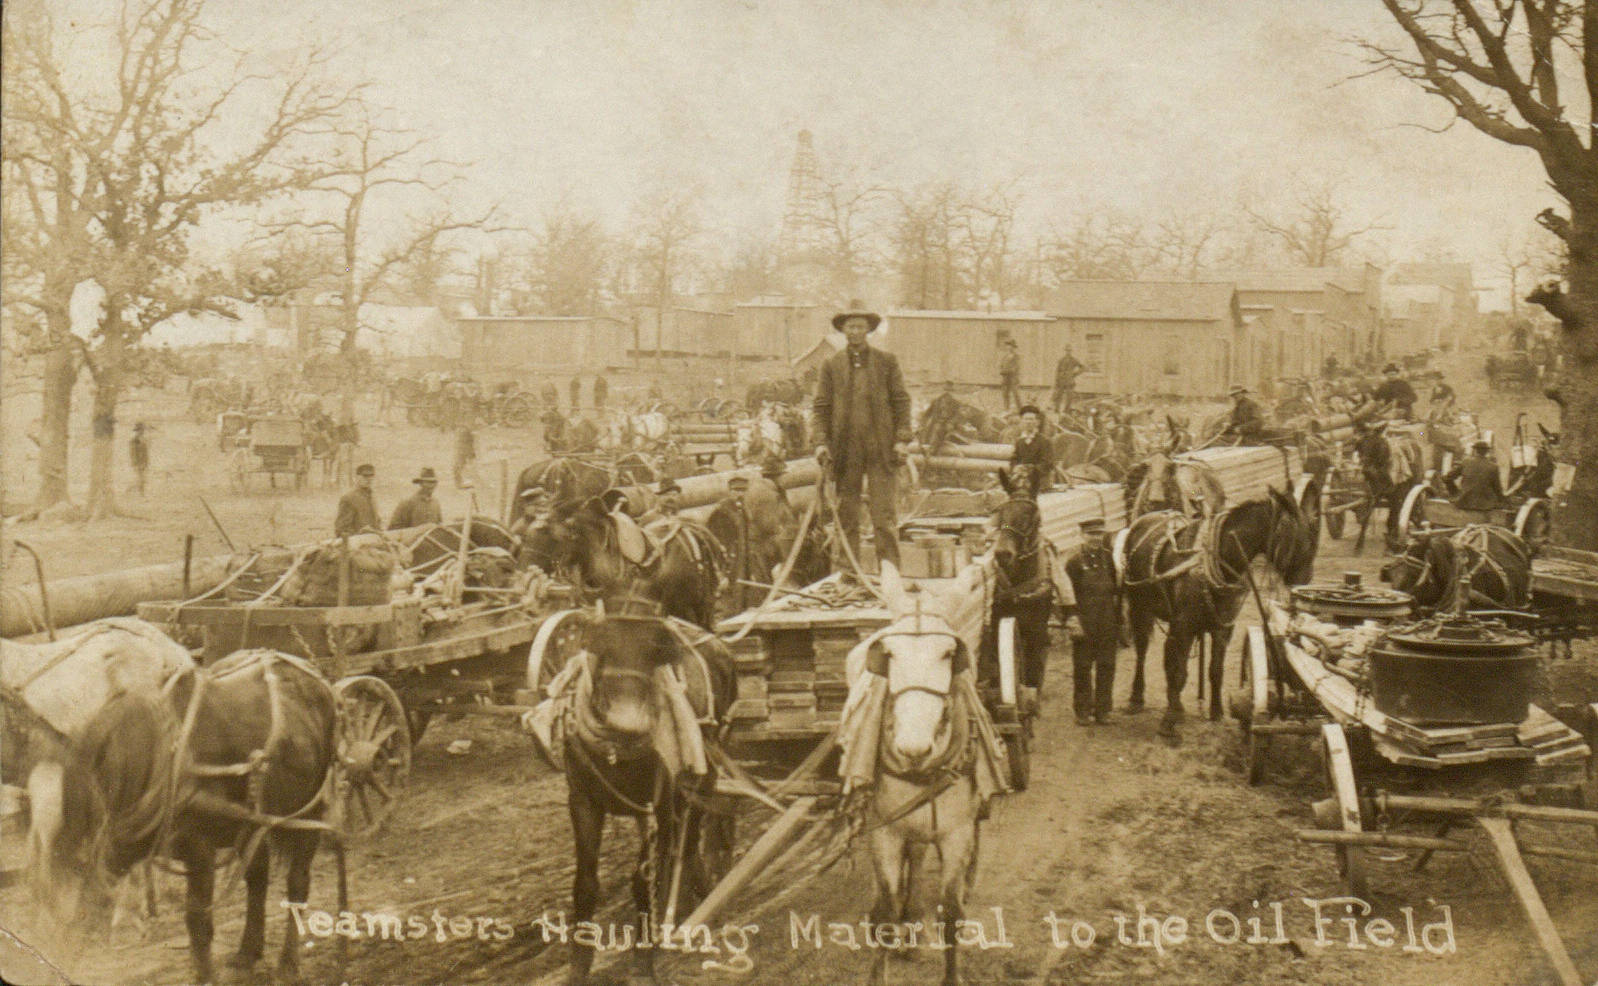 A grou of horses and wagons with oil fields in background